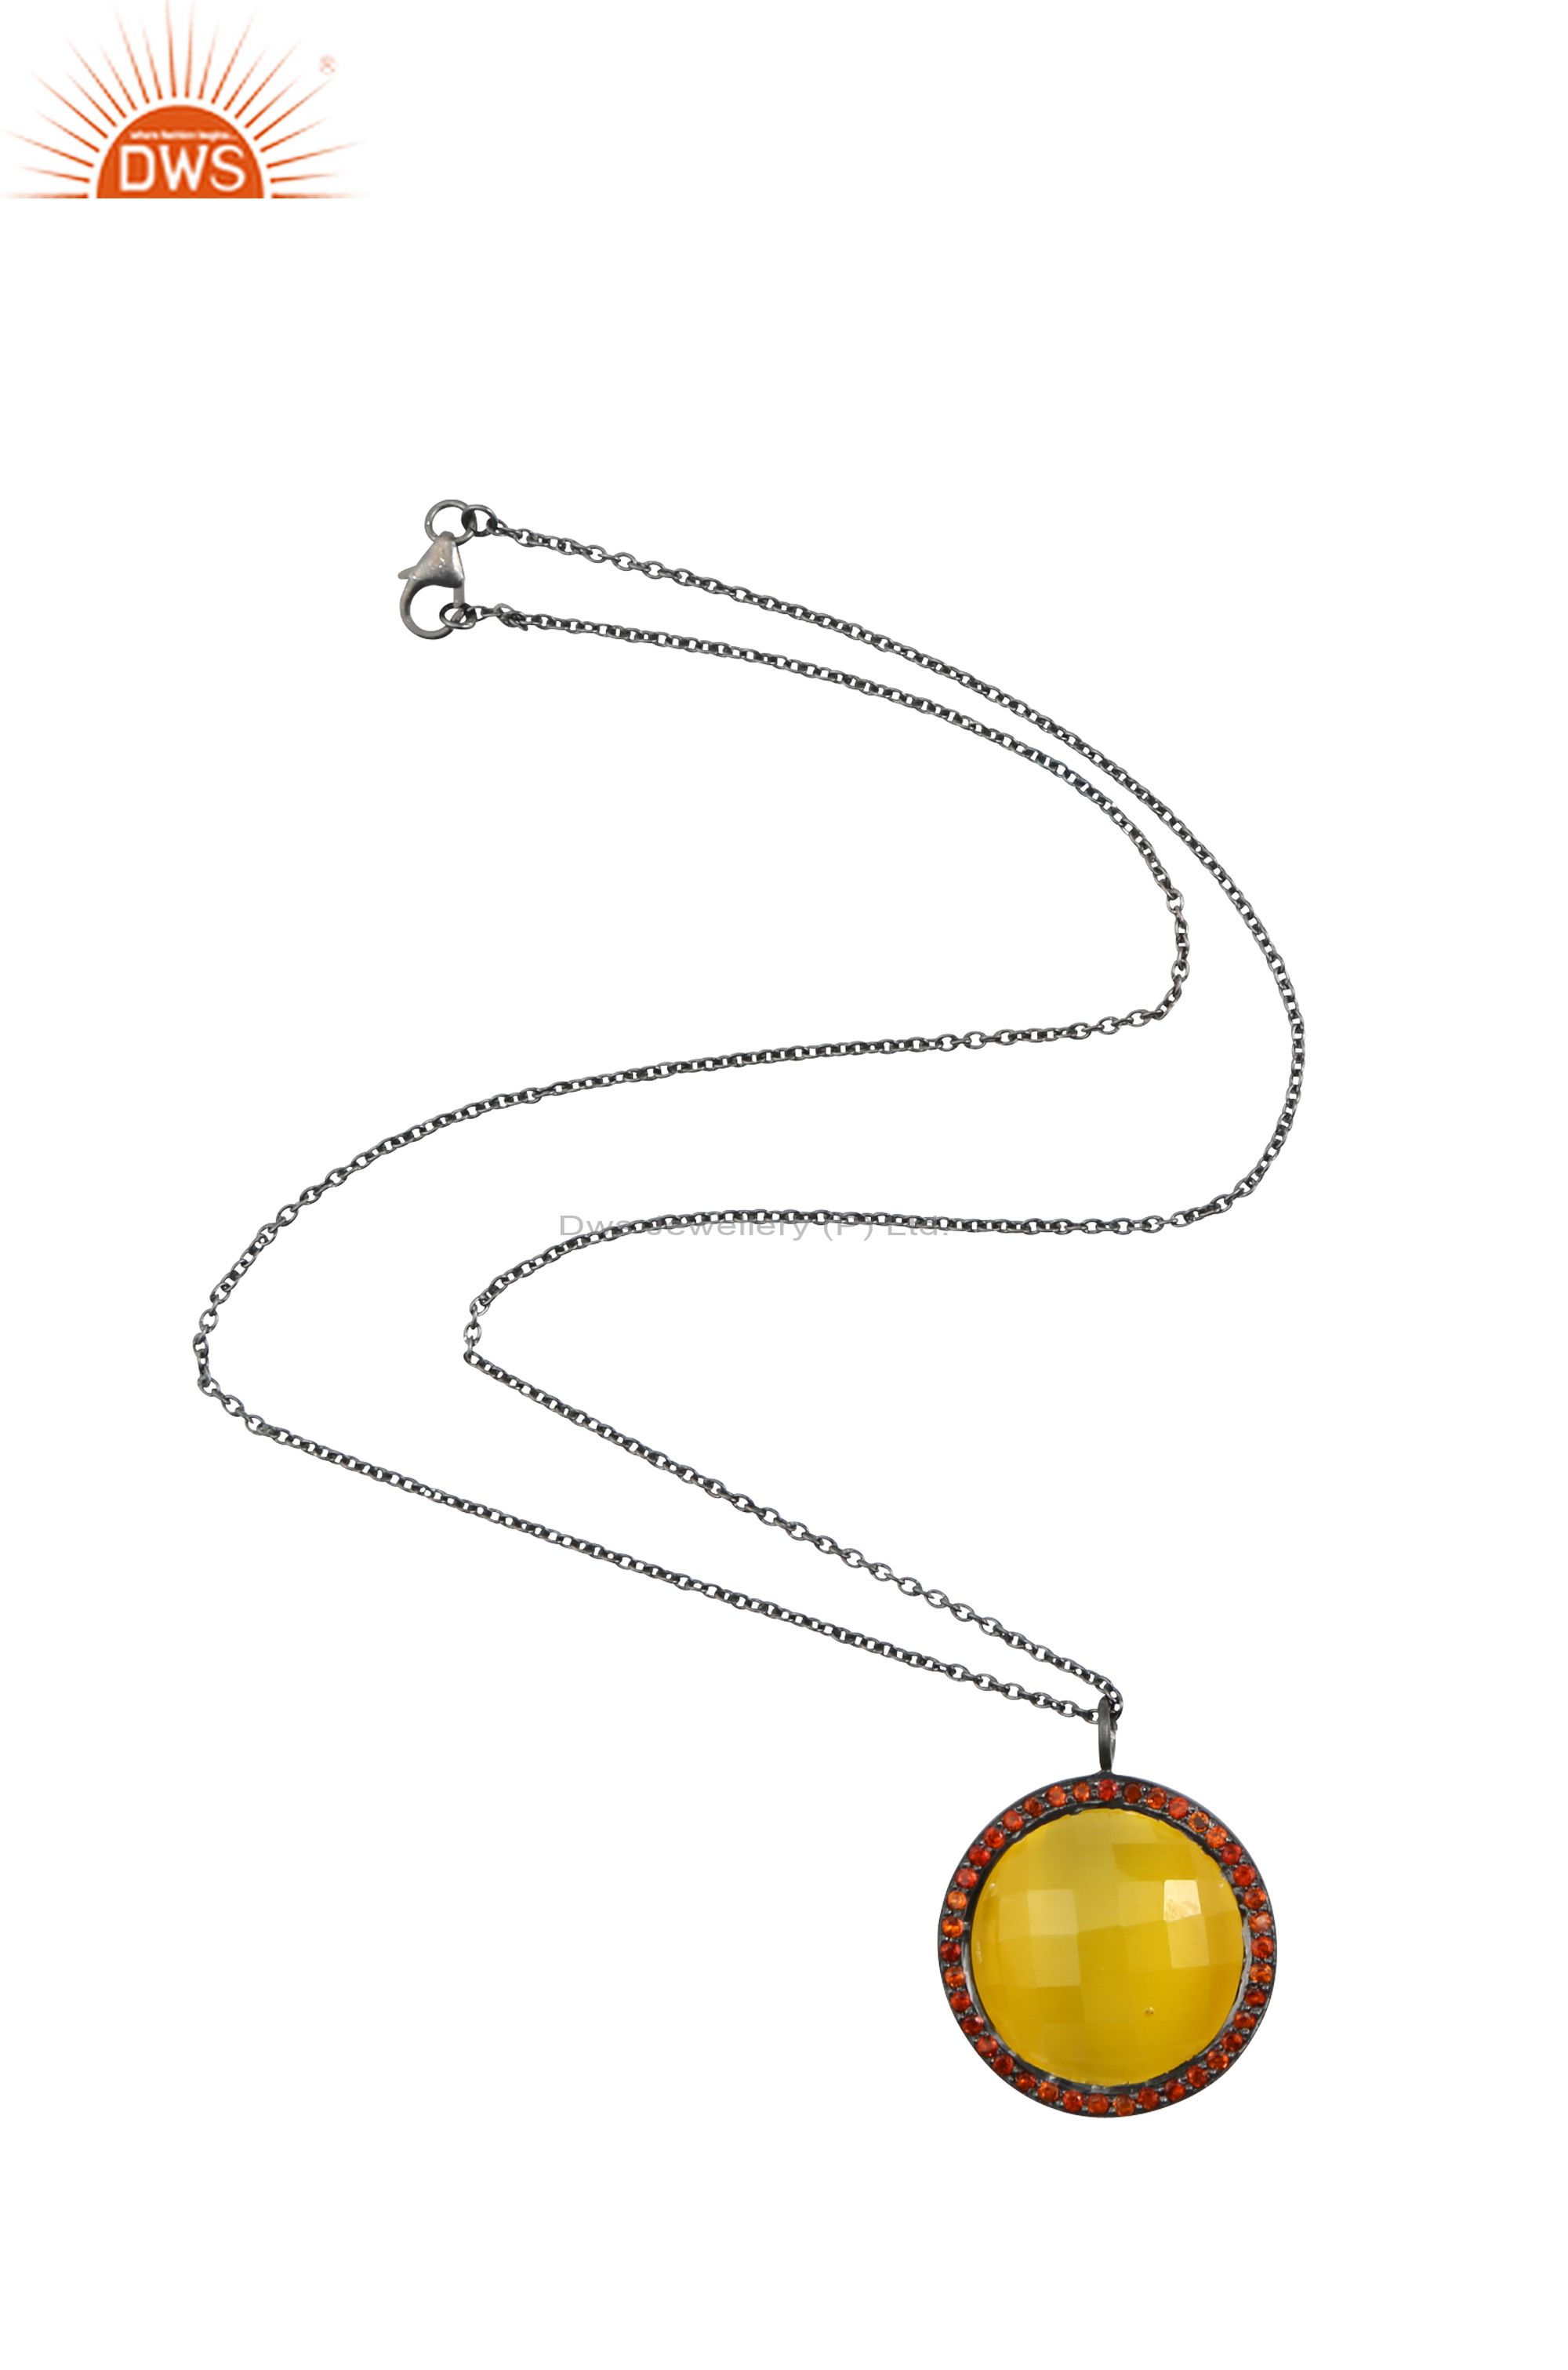 Oxidized 925 sterling silver yellow moonstone and citrine halo pendant necklace